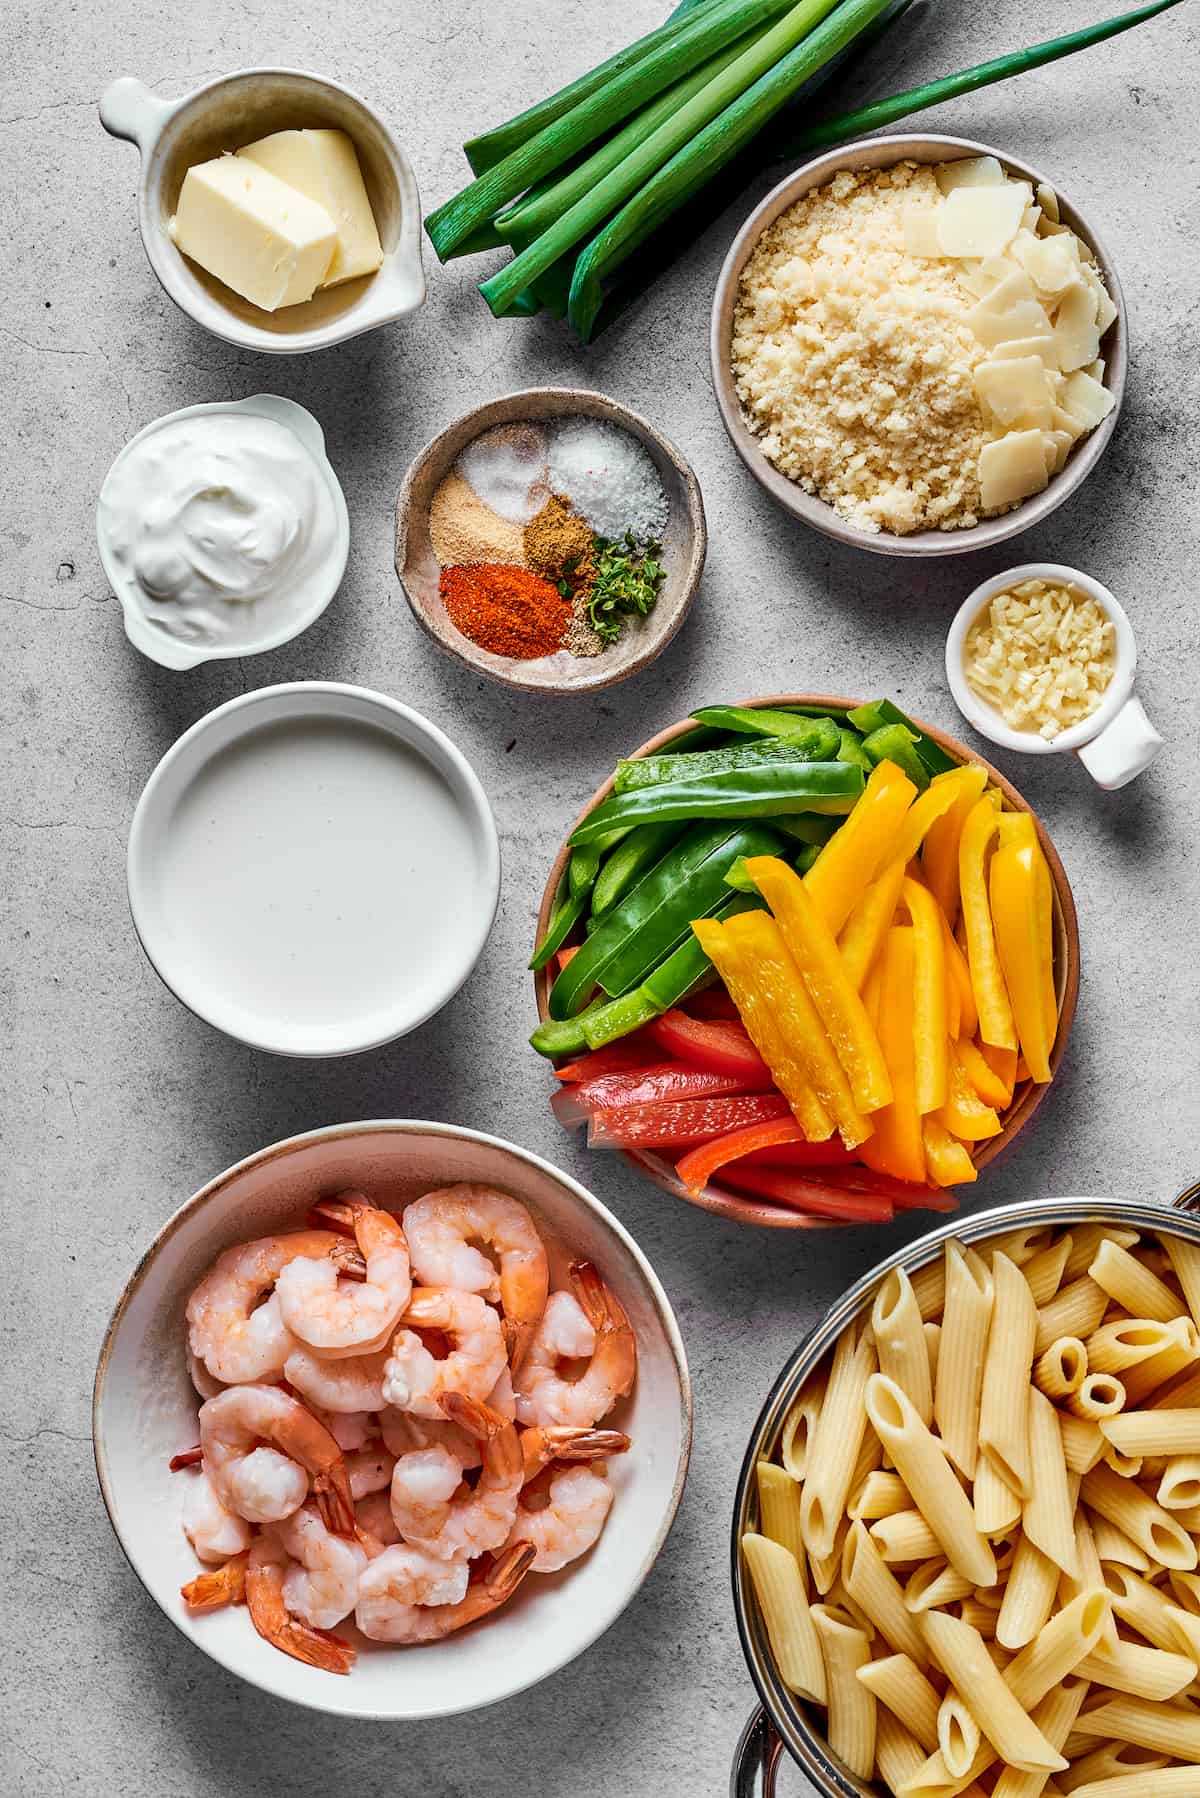 From top left: Butter, green onions, parmesan cheese, cream cheese, spices, garlic, heavy cream, sliced bell peppers (red, yellow, and green), shrimp, penne pasta.